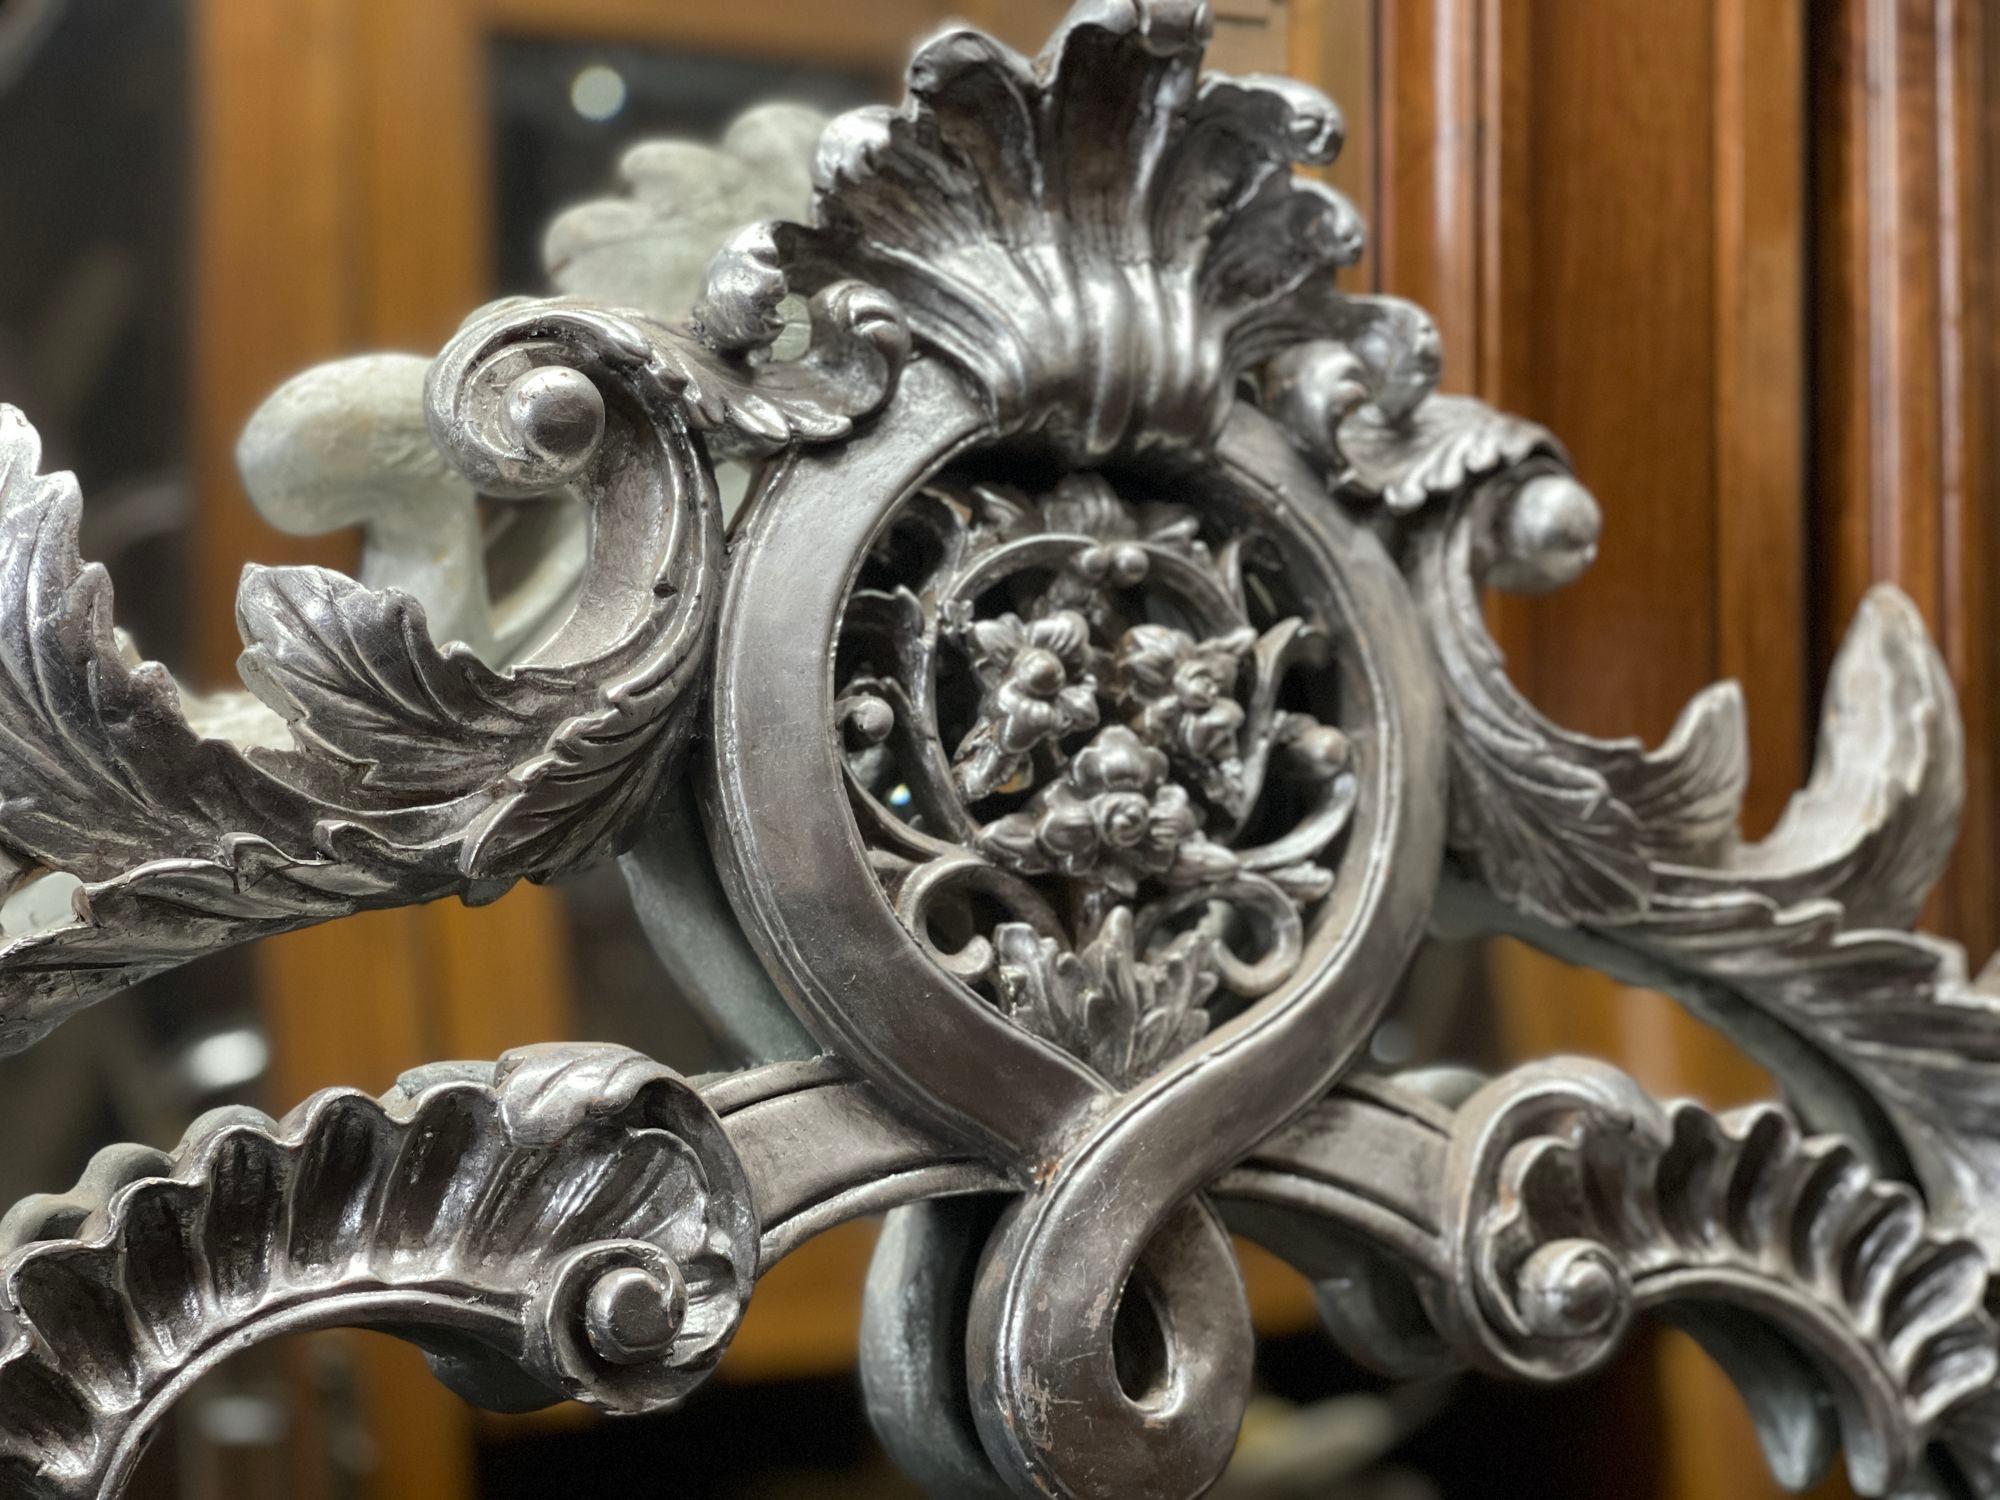 Hand-carved silver leaf finish mirror. Made in Italy, early 20th century.
Dimensions:
66